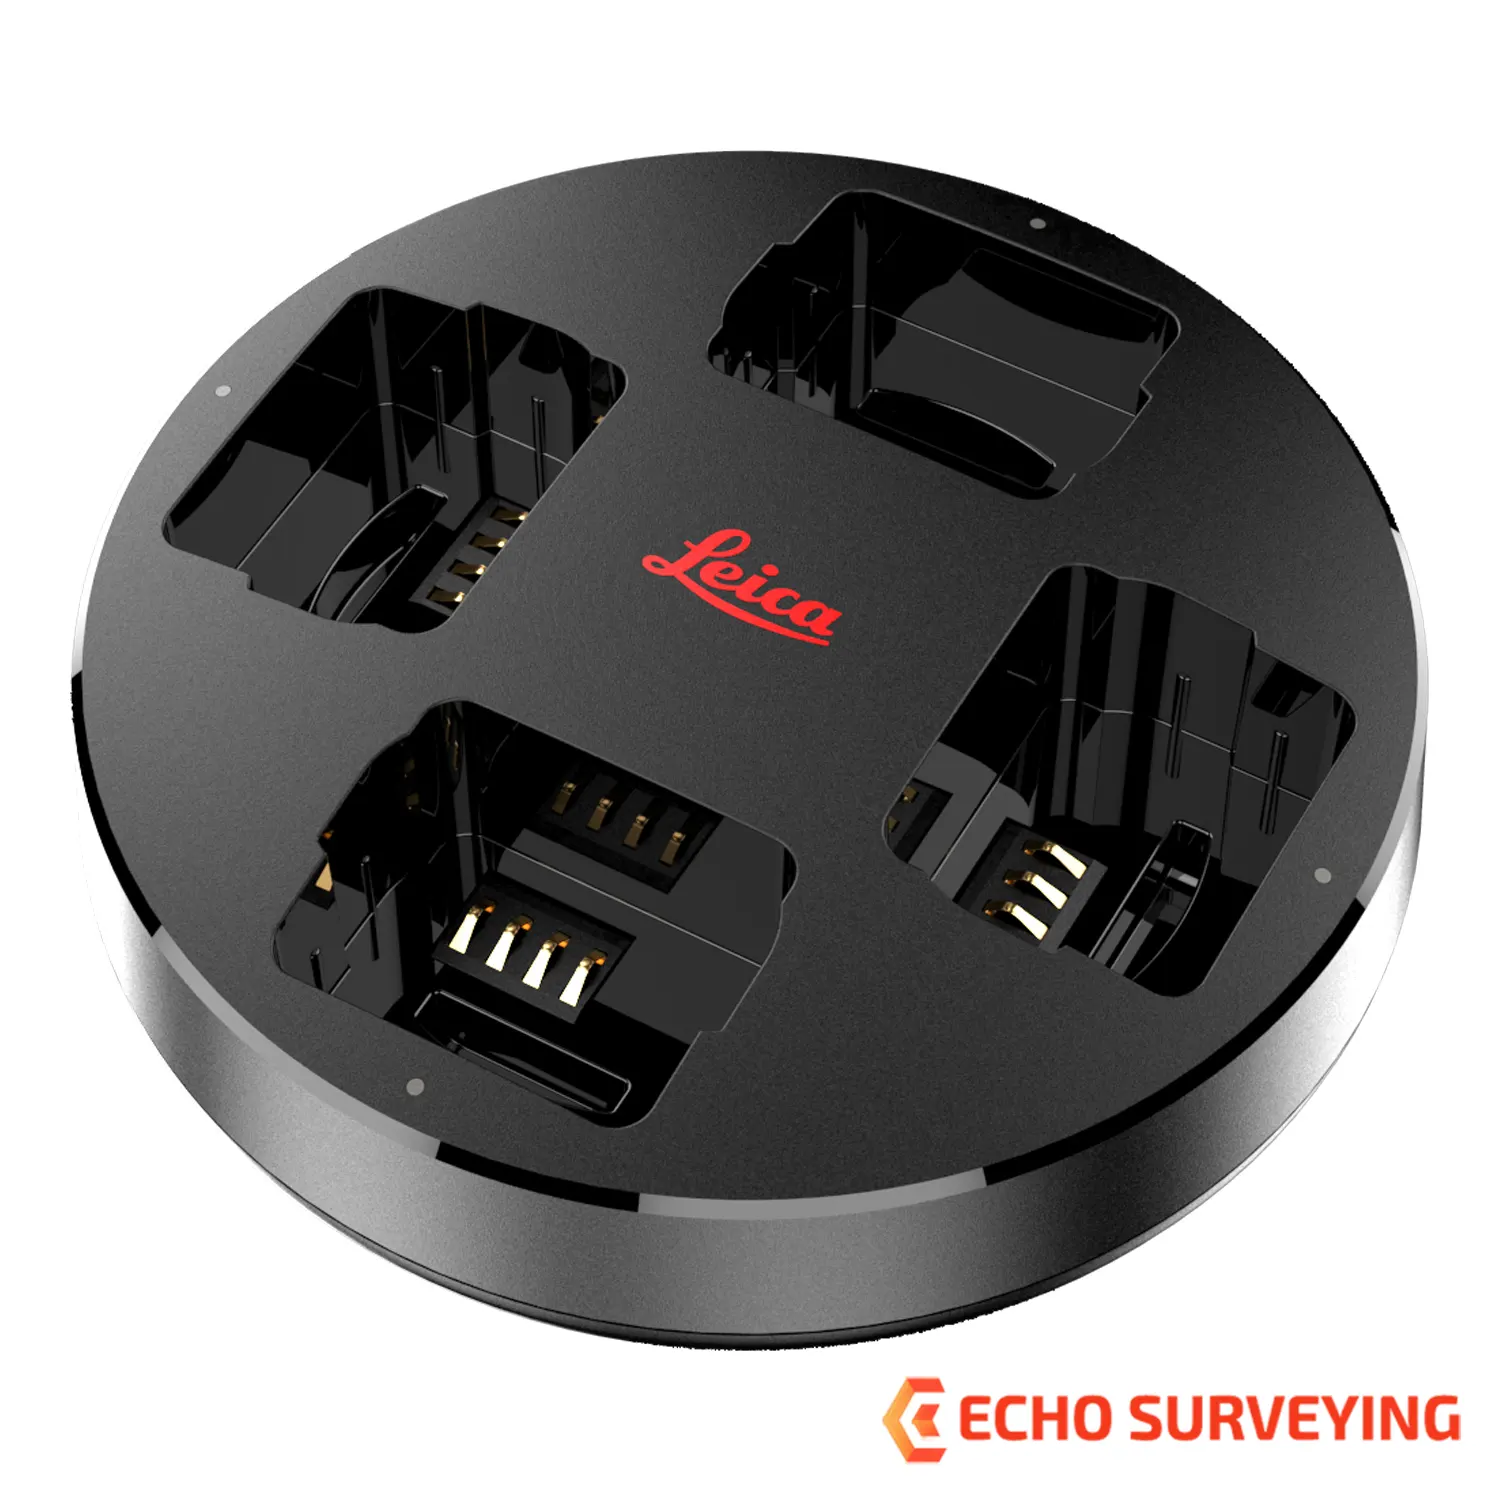 Leica-BLK360-G2-Charger.webp